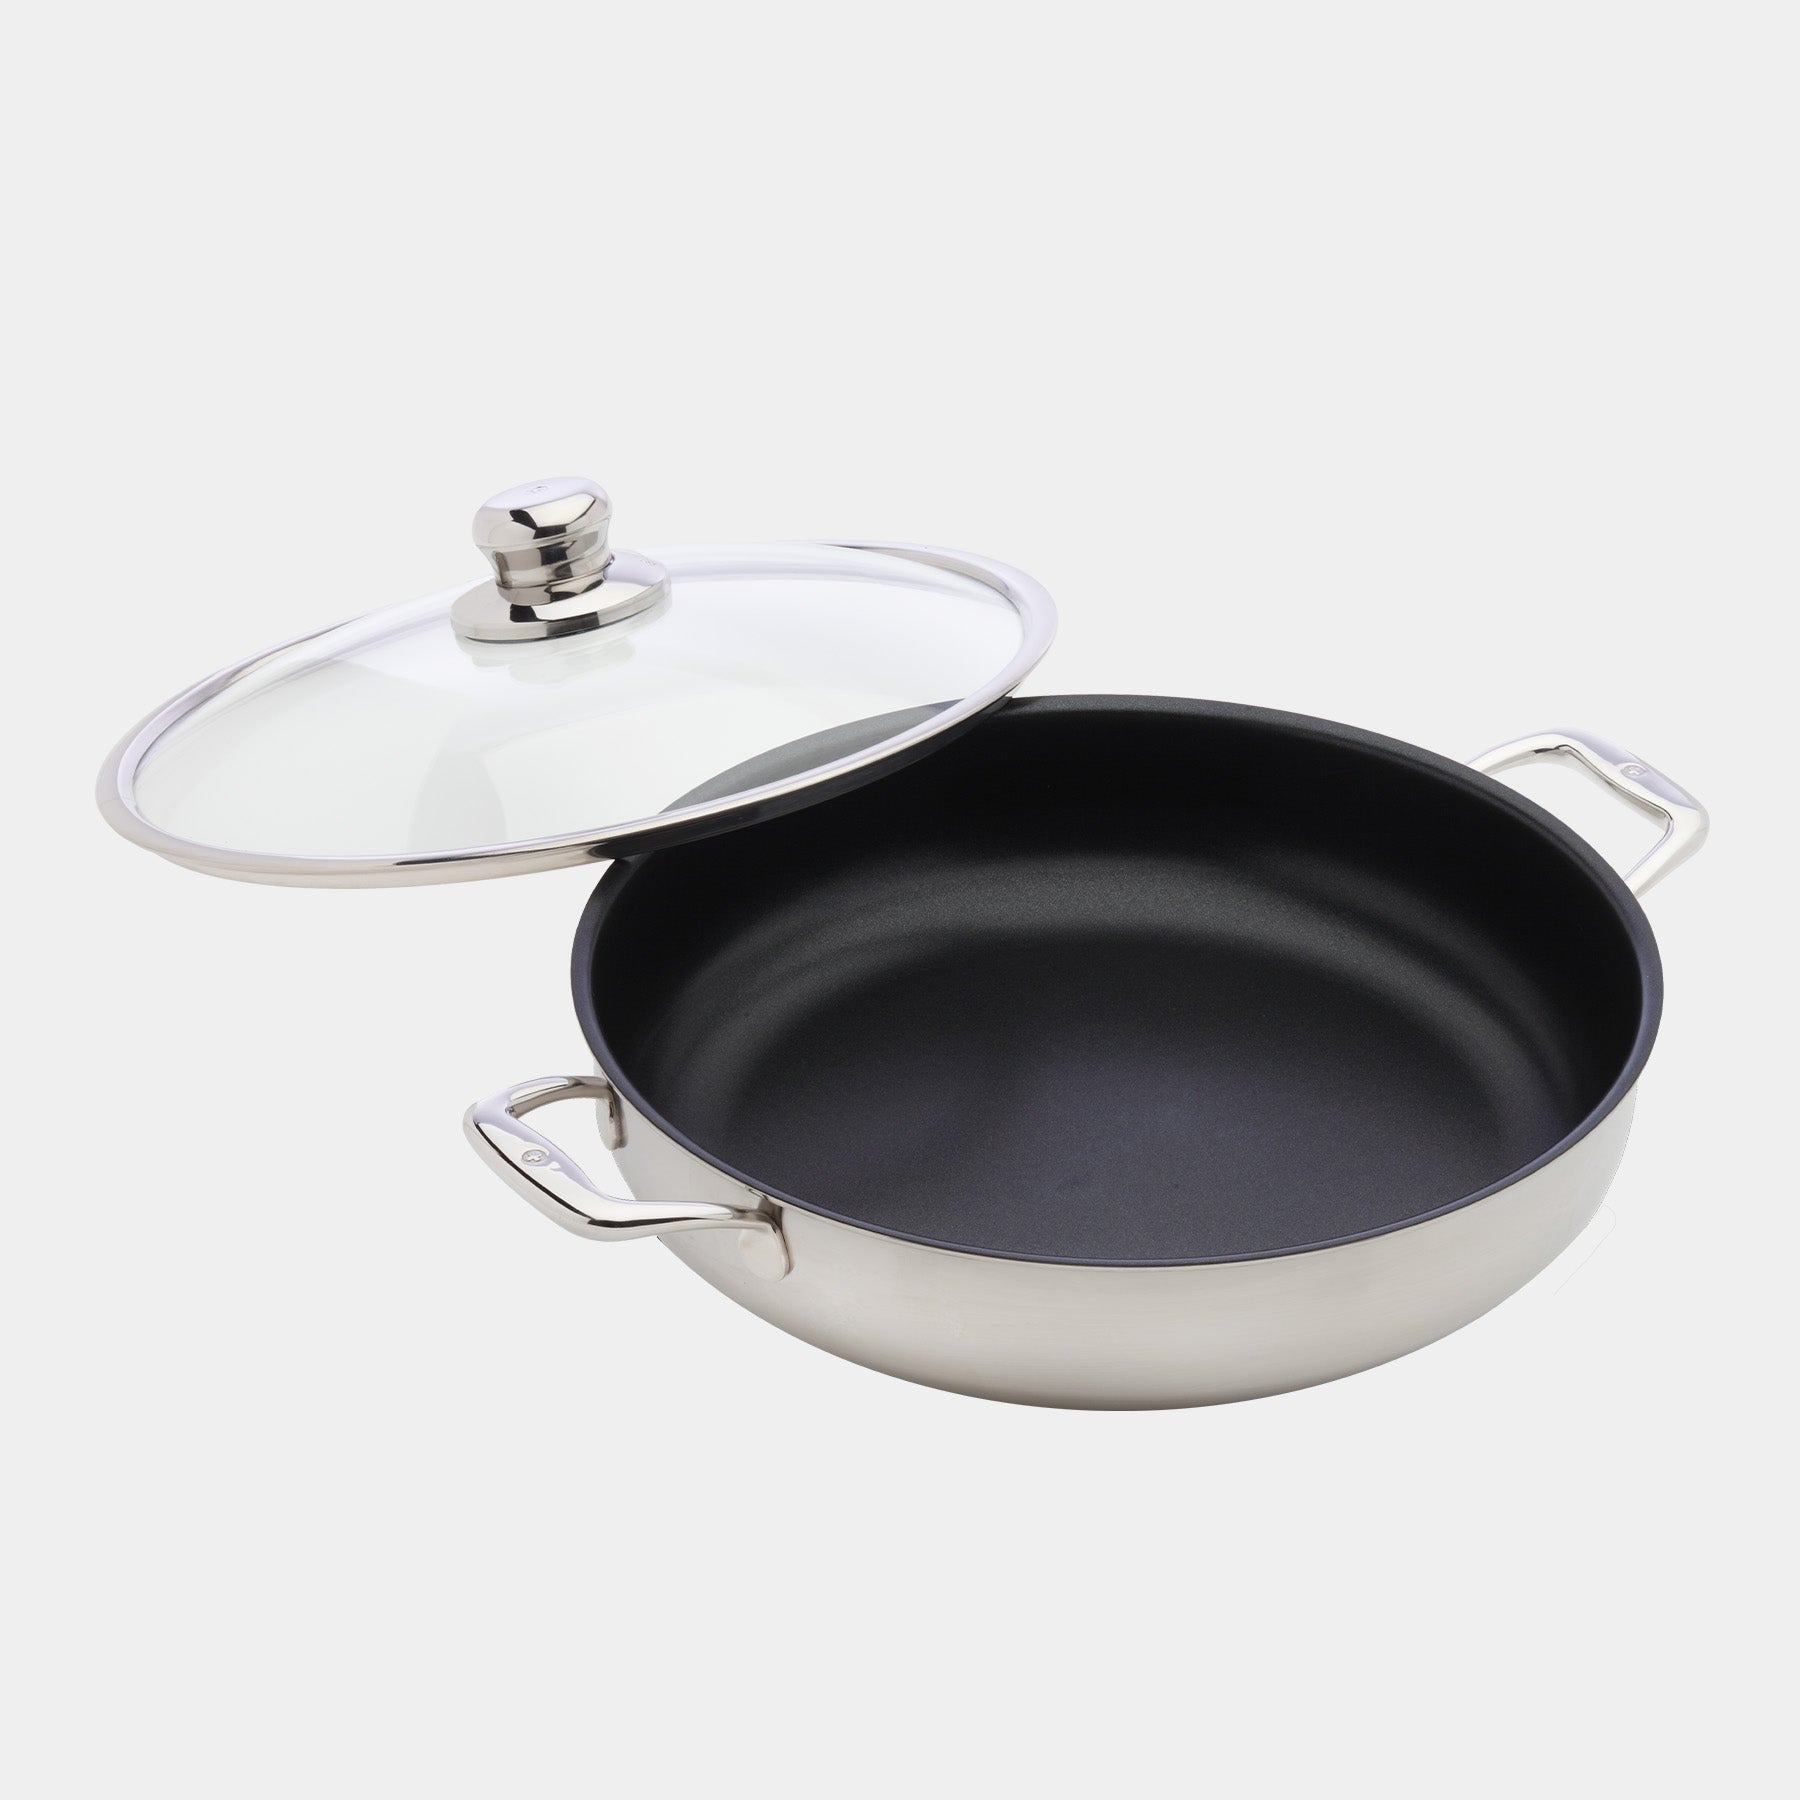 Nonstick Clad 5.3 qt Stainless Chef's Pan with Glass Lid - Induction